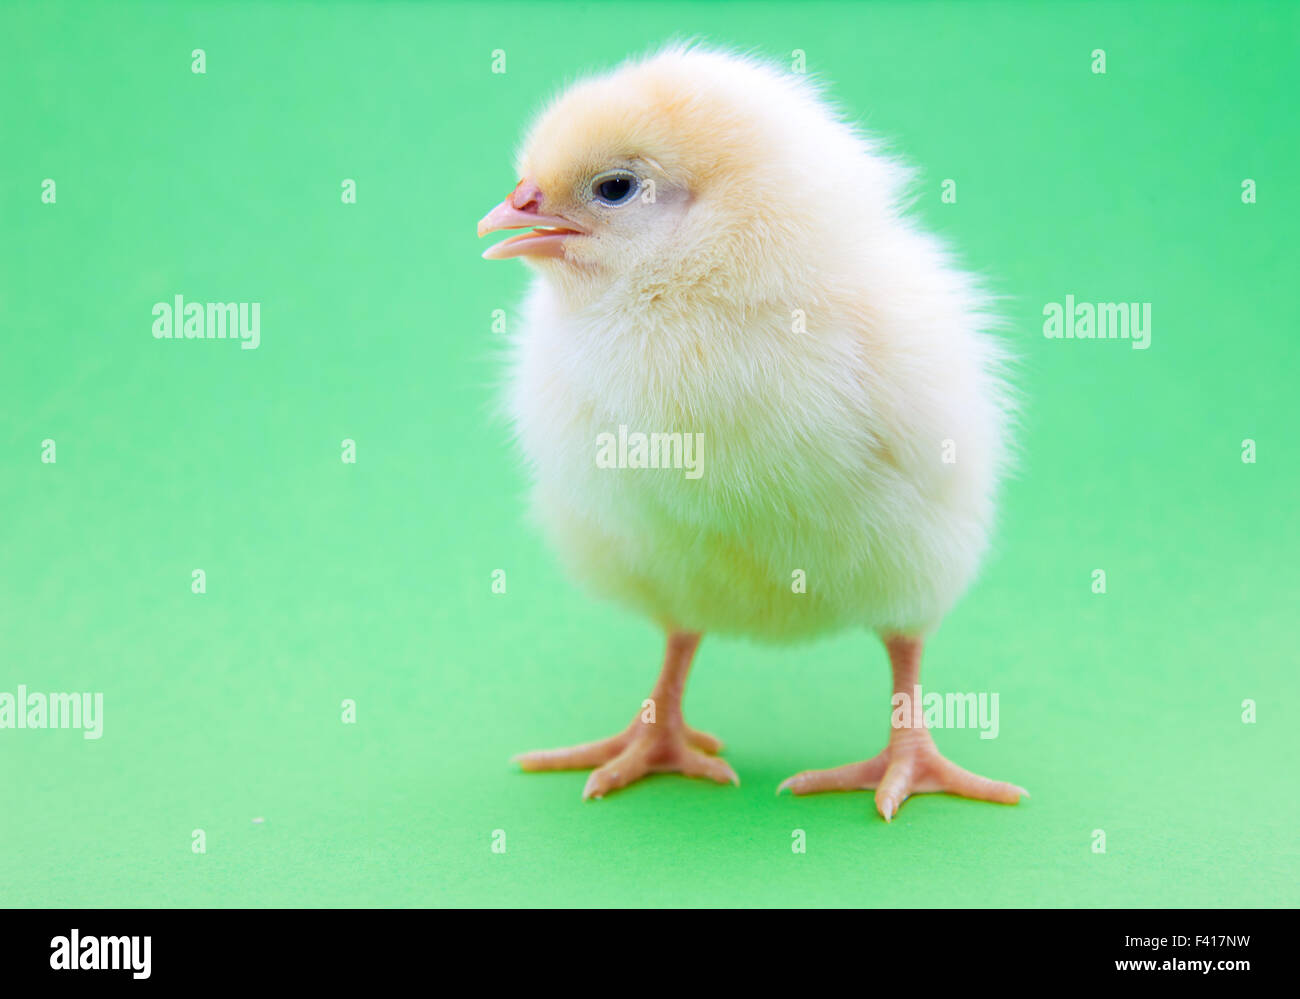 Cute little chick on green background Stock Photo